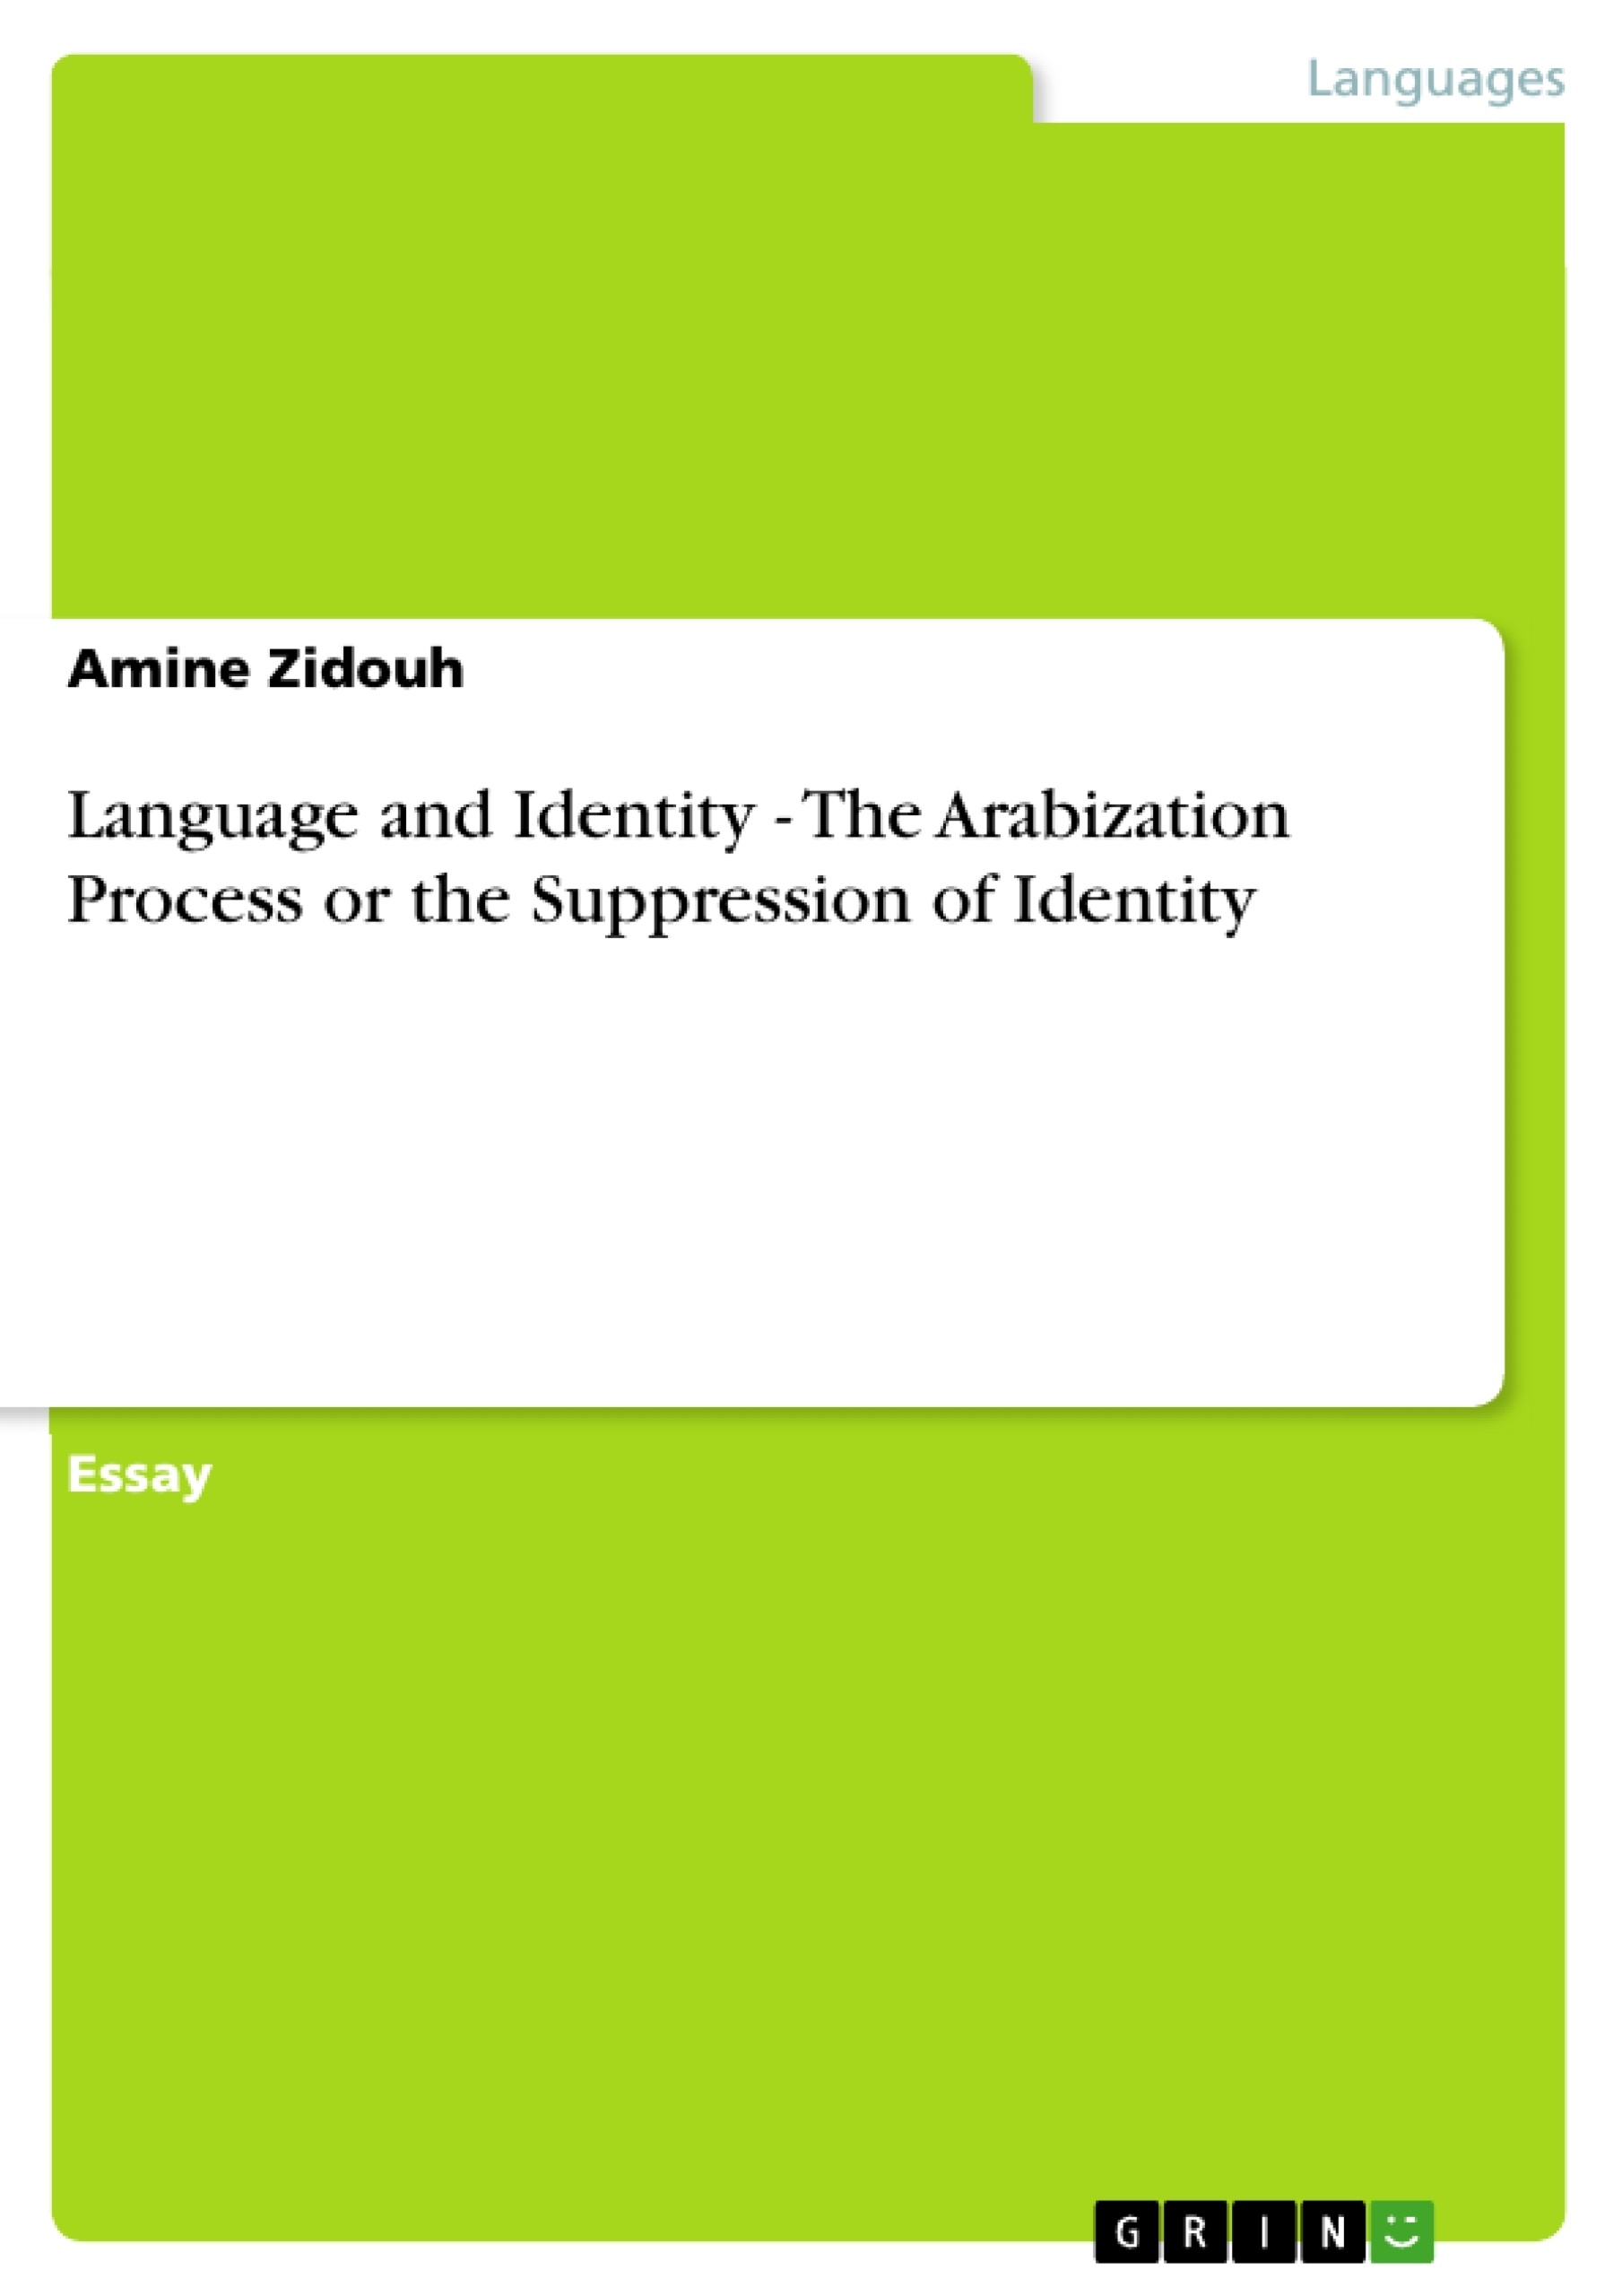 Título: Language and Identity - The Arabization Process or the Suppression of Identity